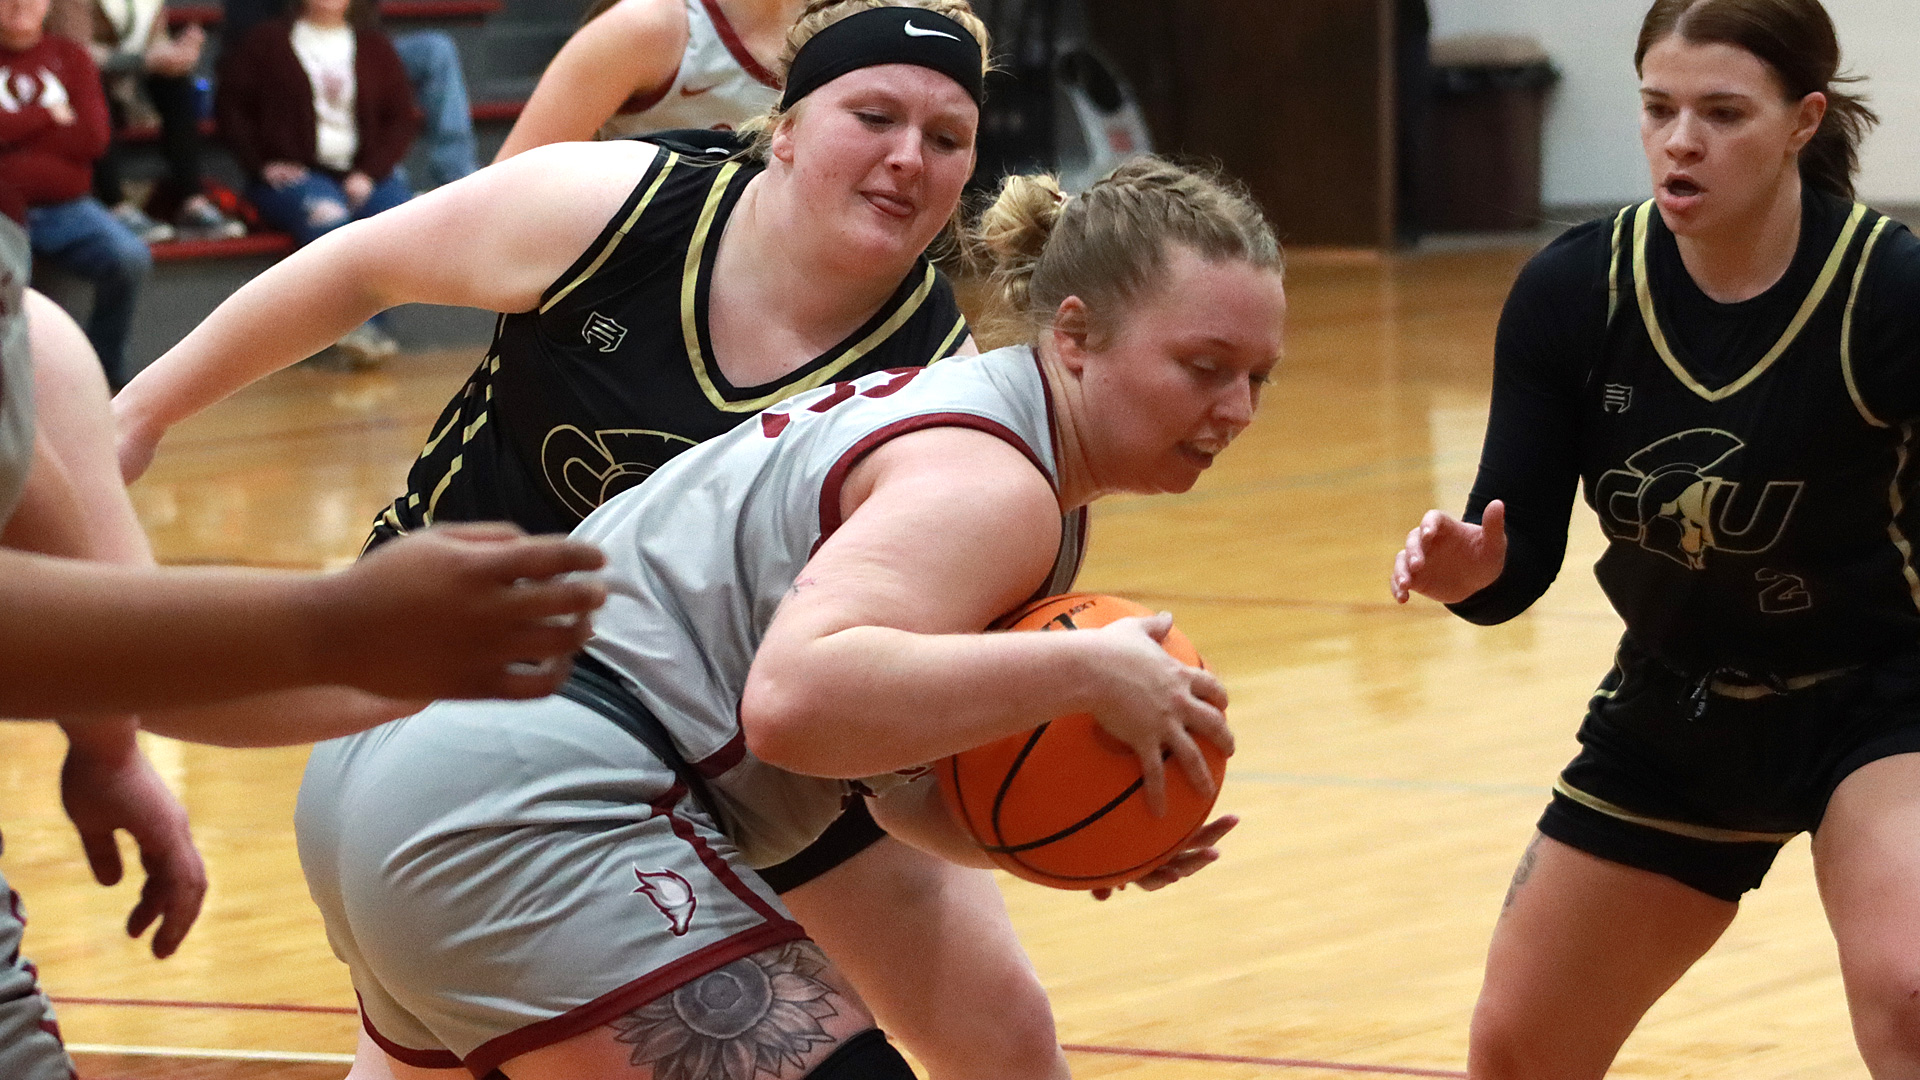 CCCB senior Lexi Whisenand scored 14 points to lead the Saints during their 50-27 loss to Calvary University on Tuesday night.